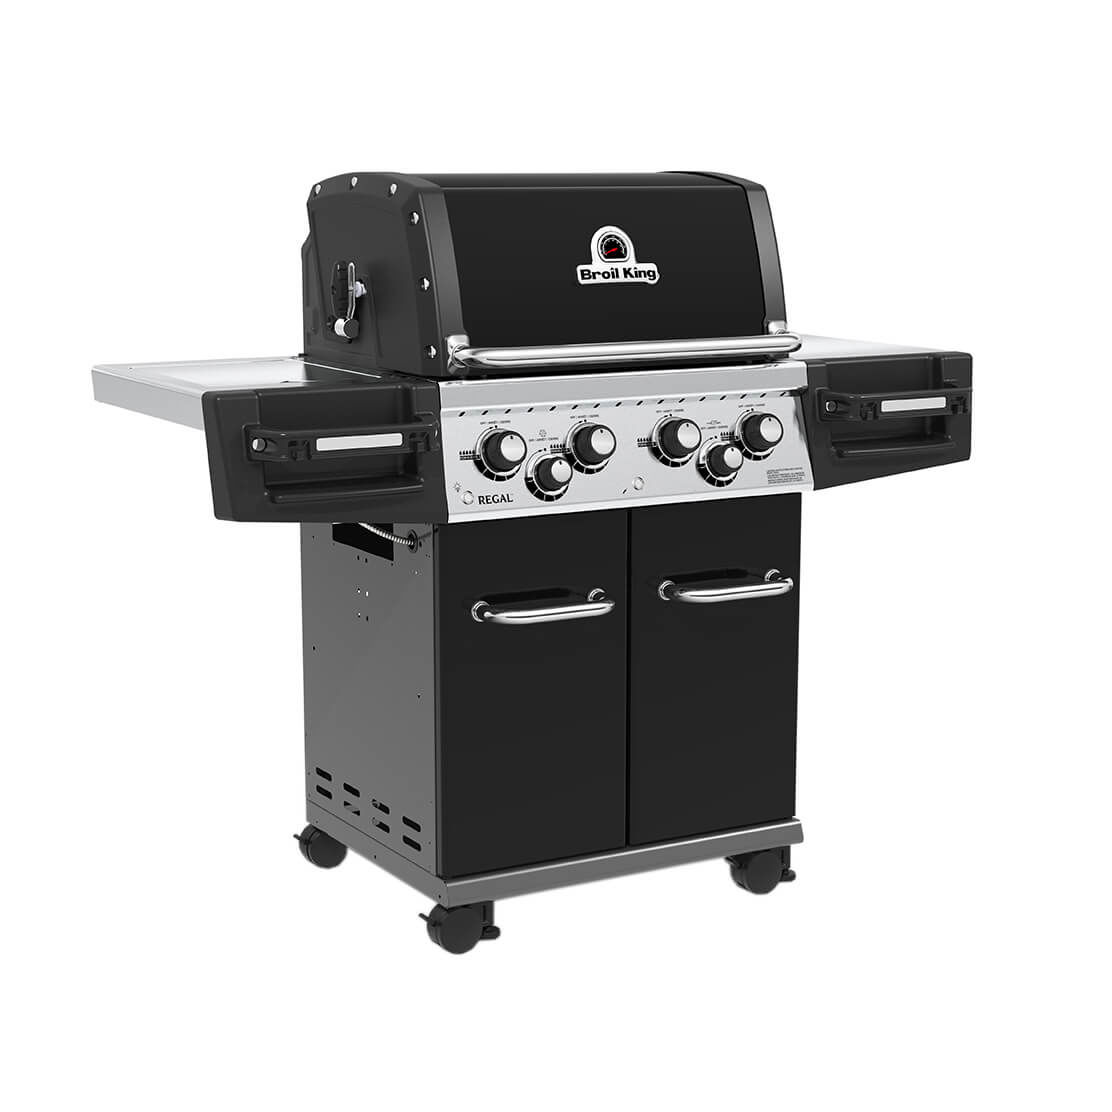 Image of Broil King Regal 490 Black Grill bei nettoshop.ch